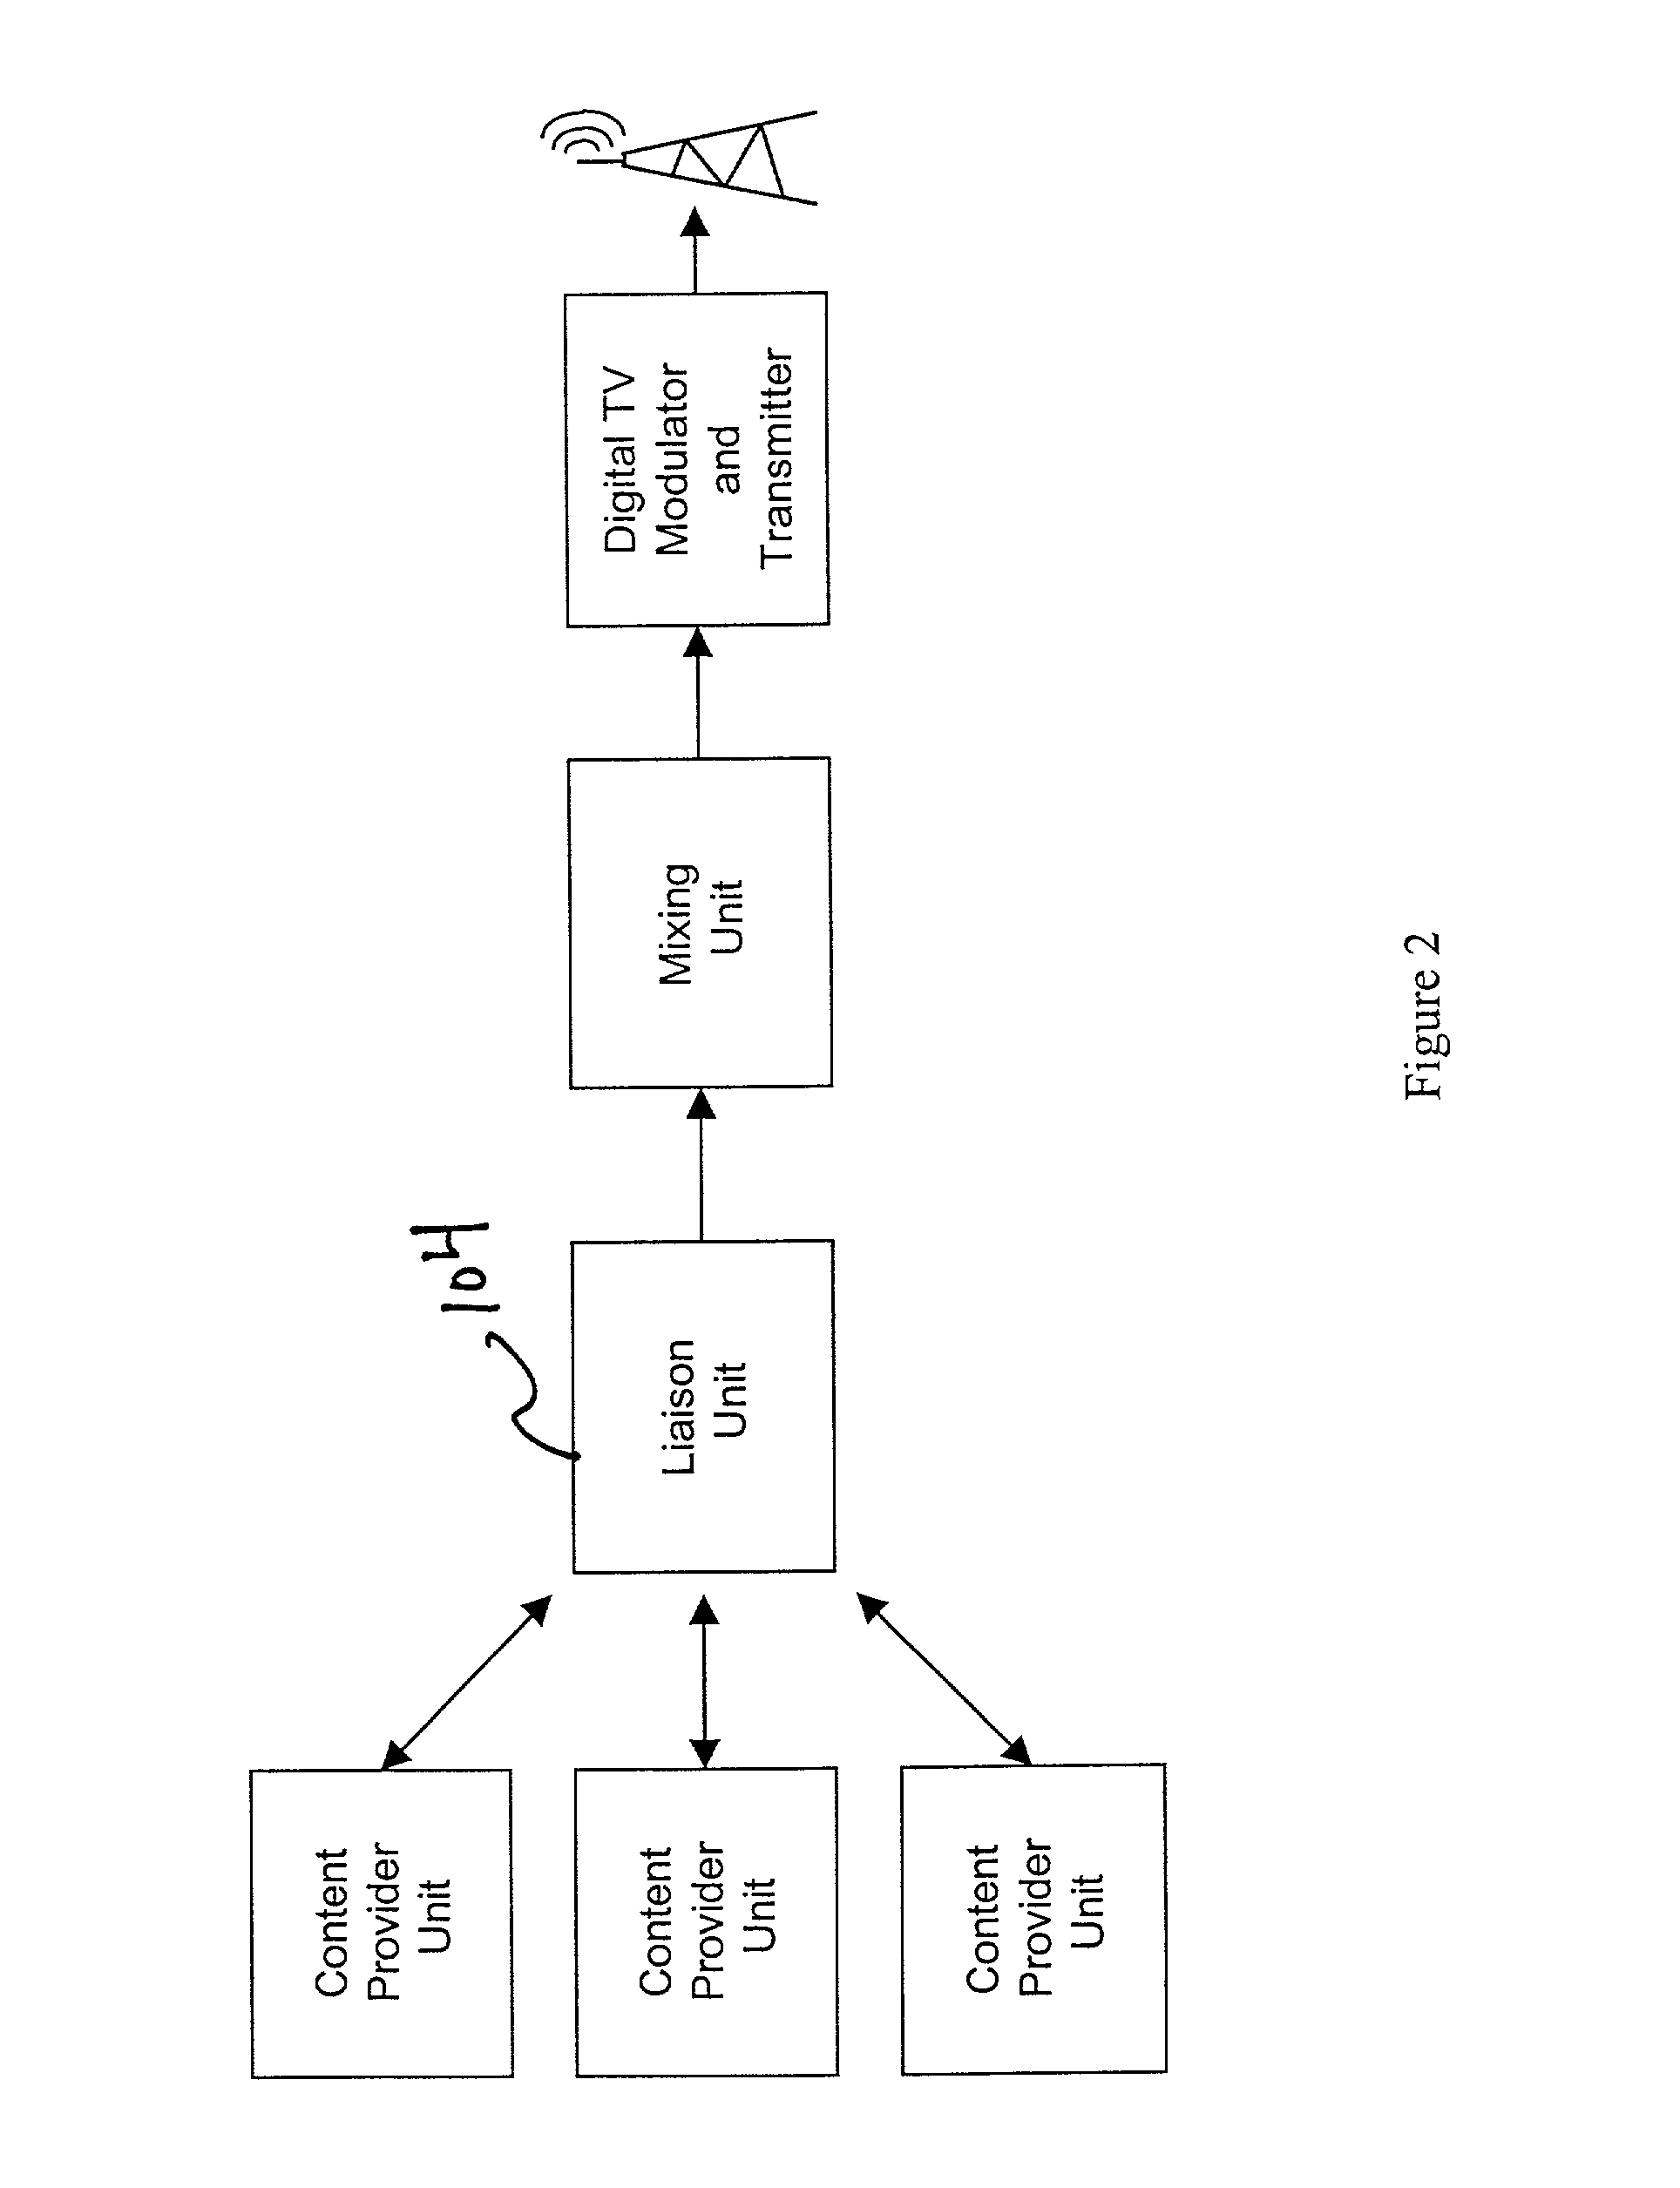 Three part architecture for digital television data broadcasting